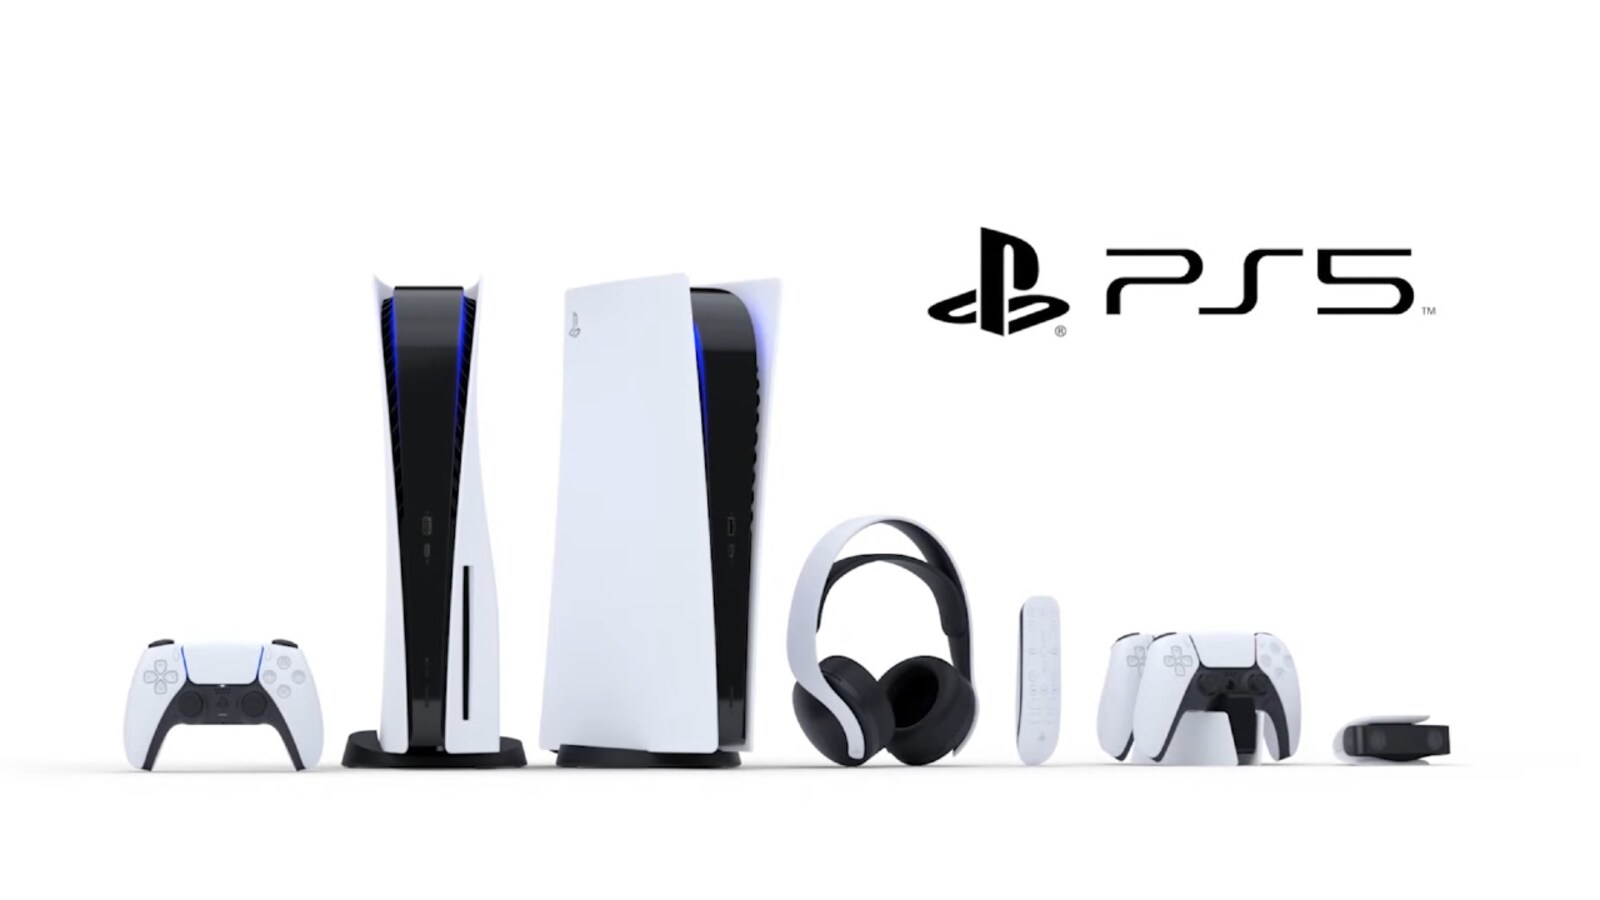 PS5, PS5 Digital Edition Pre-Order: India Restock Sold Out Minutes  After-Sale